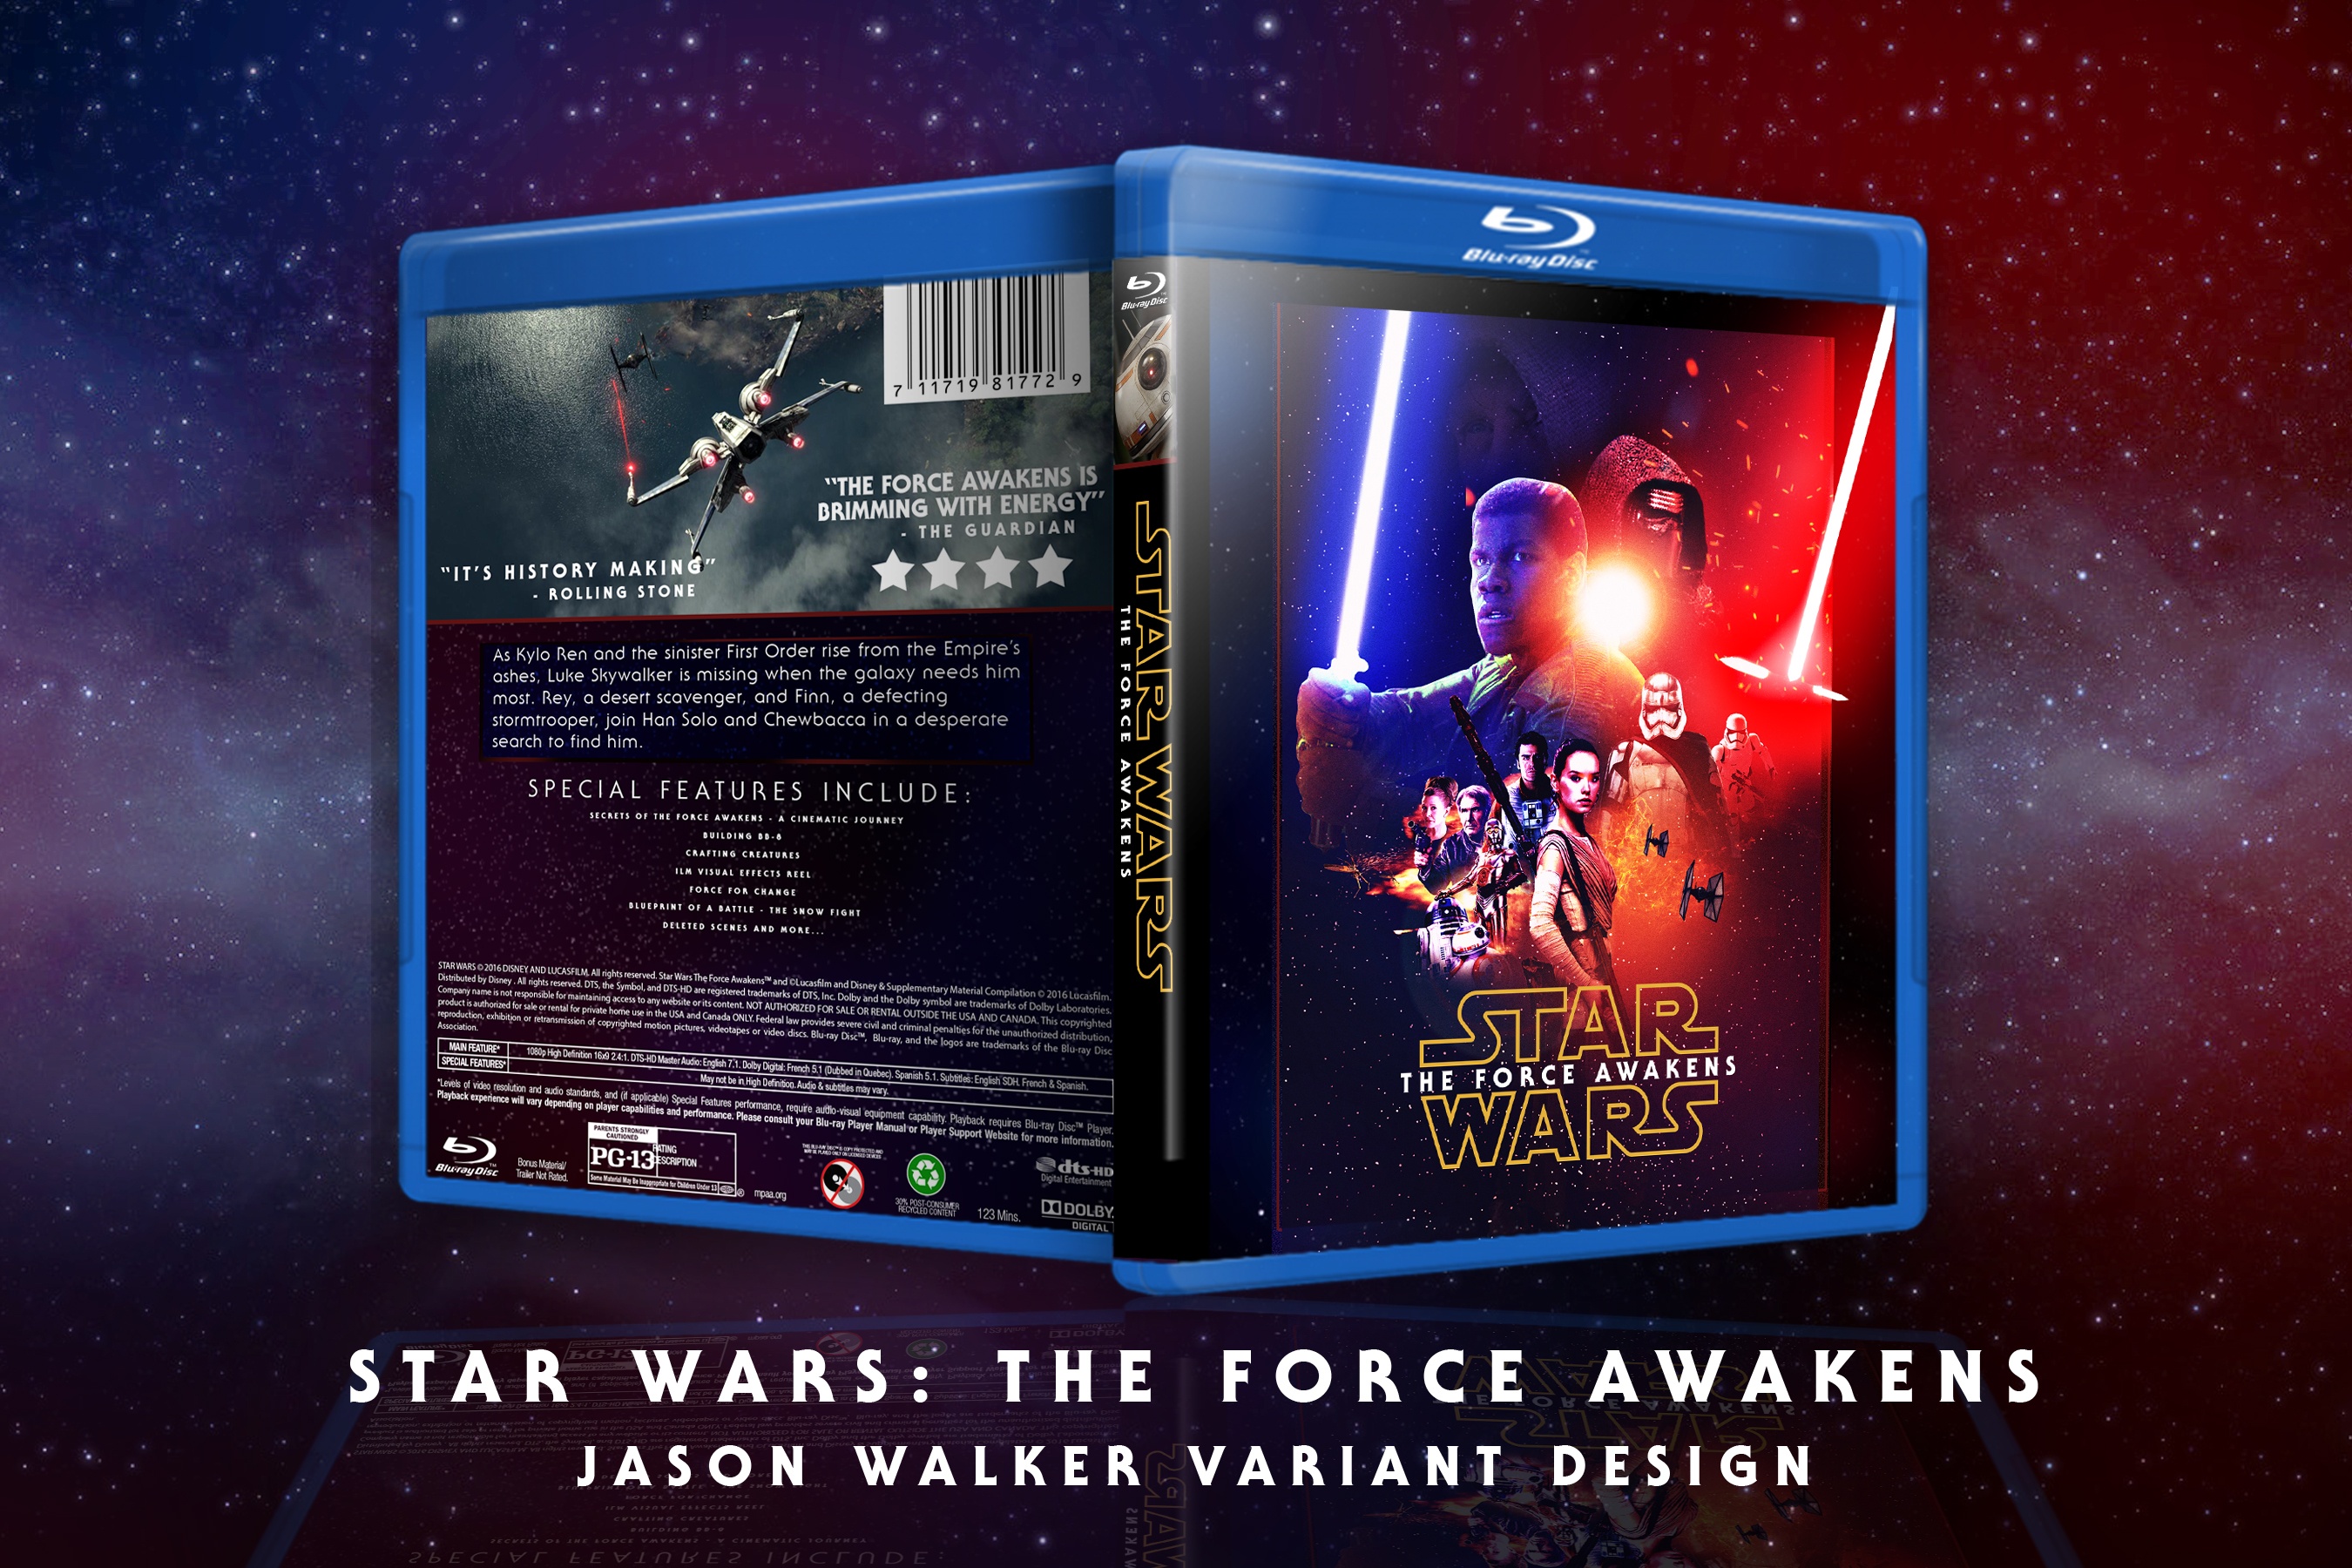 Star Wars: The Force Awakens box cover